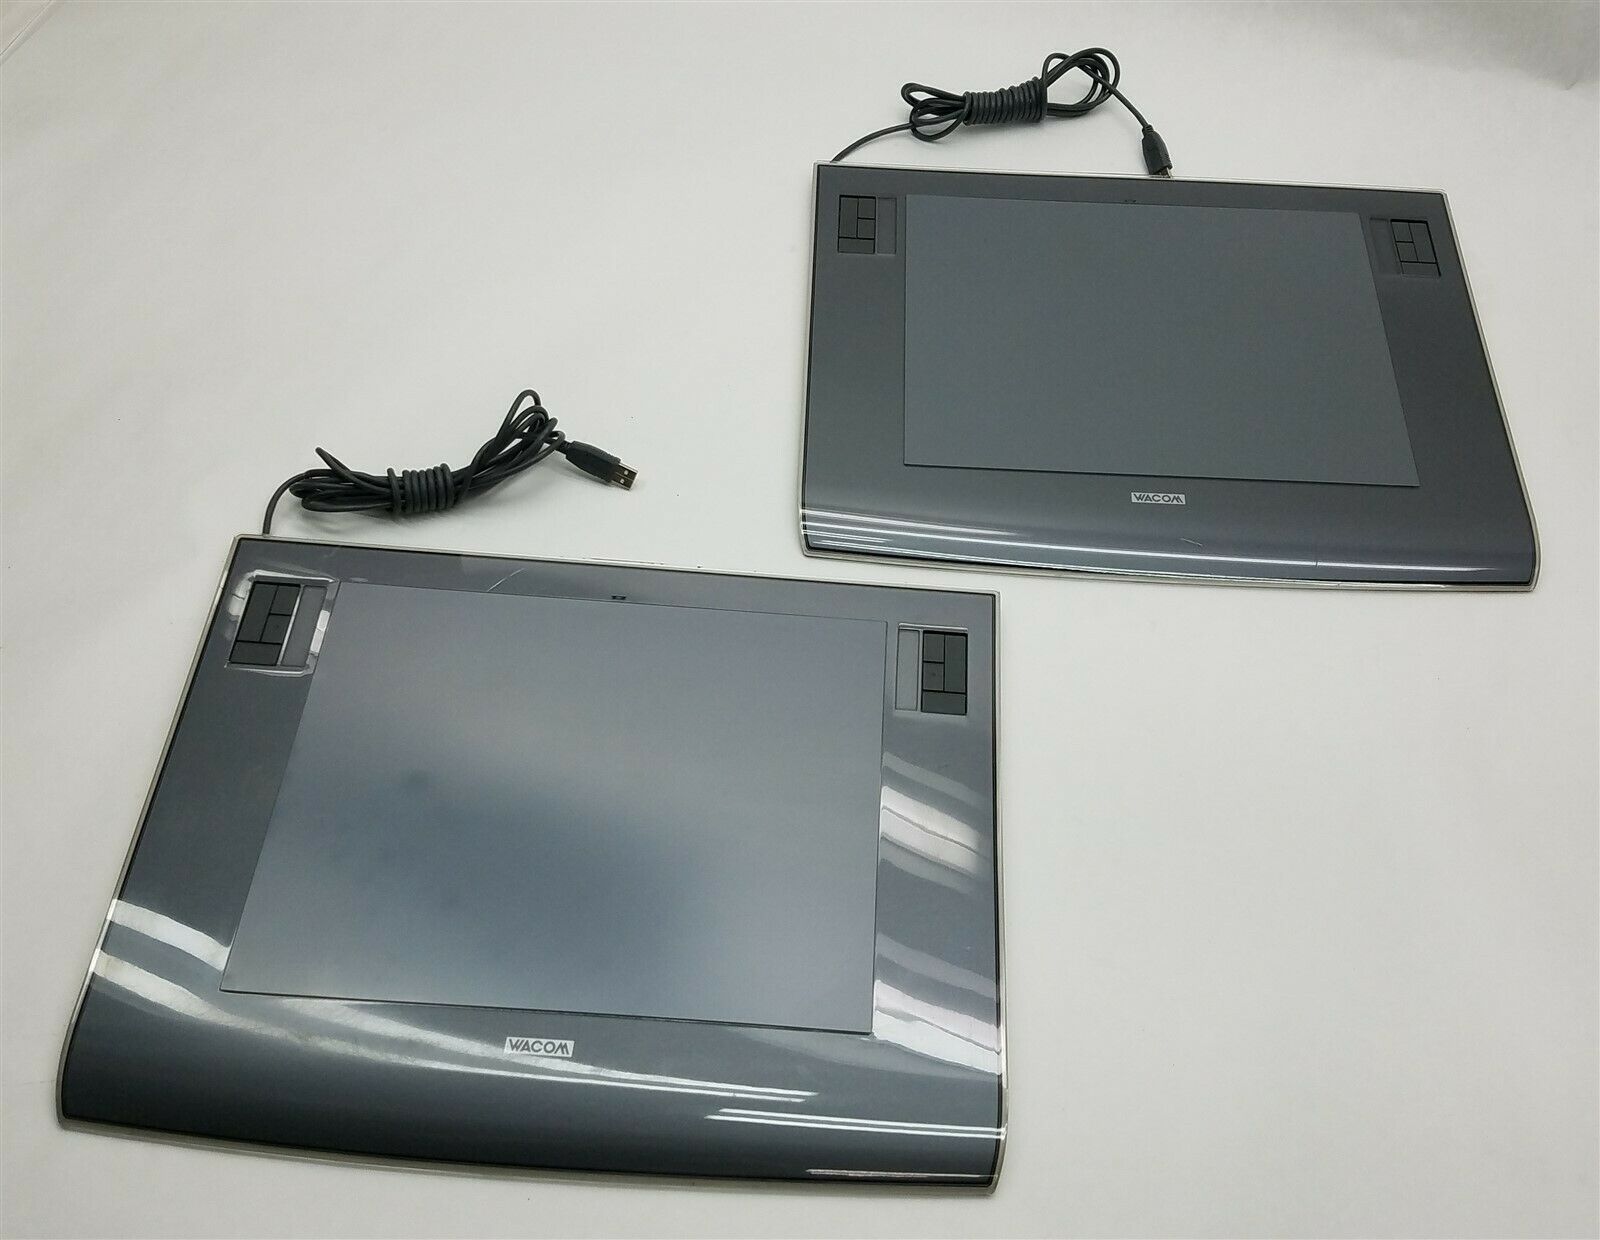 Wacom Intuos 3 PTZ-930 USB Graphic Drawing Tablet 9x12 (No Pen or Mouse) LOT 2